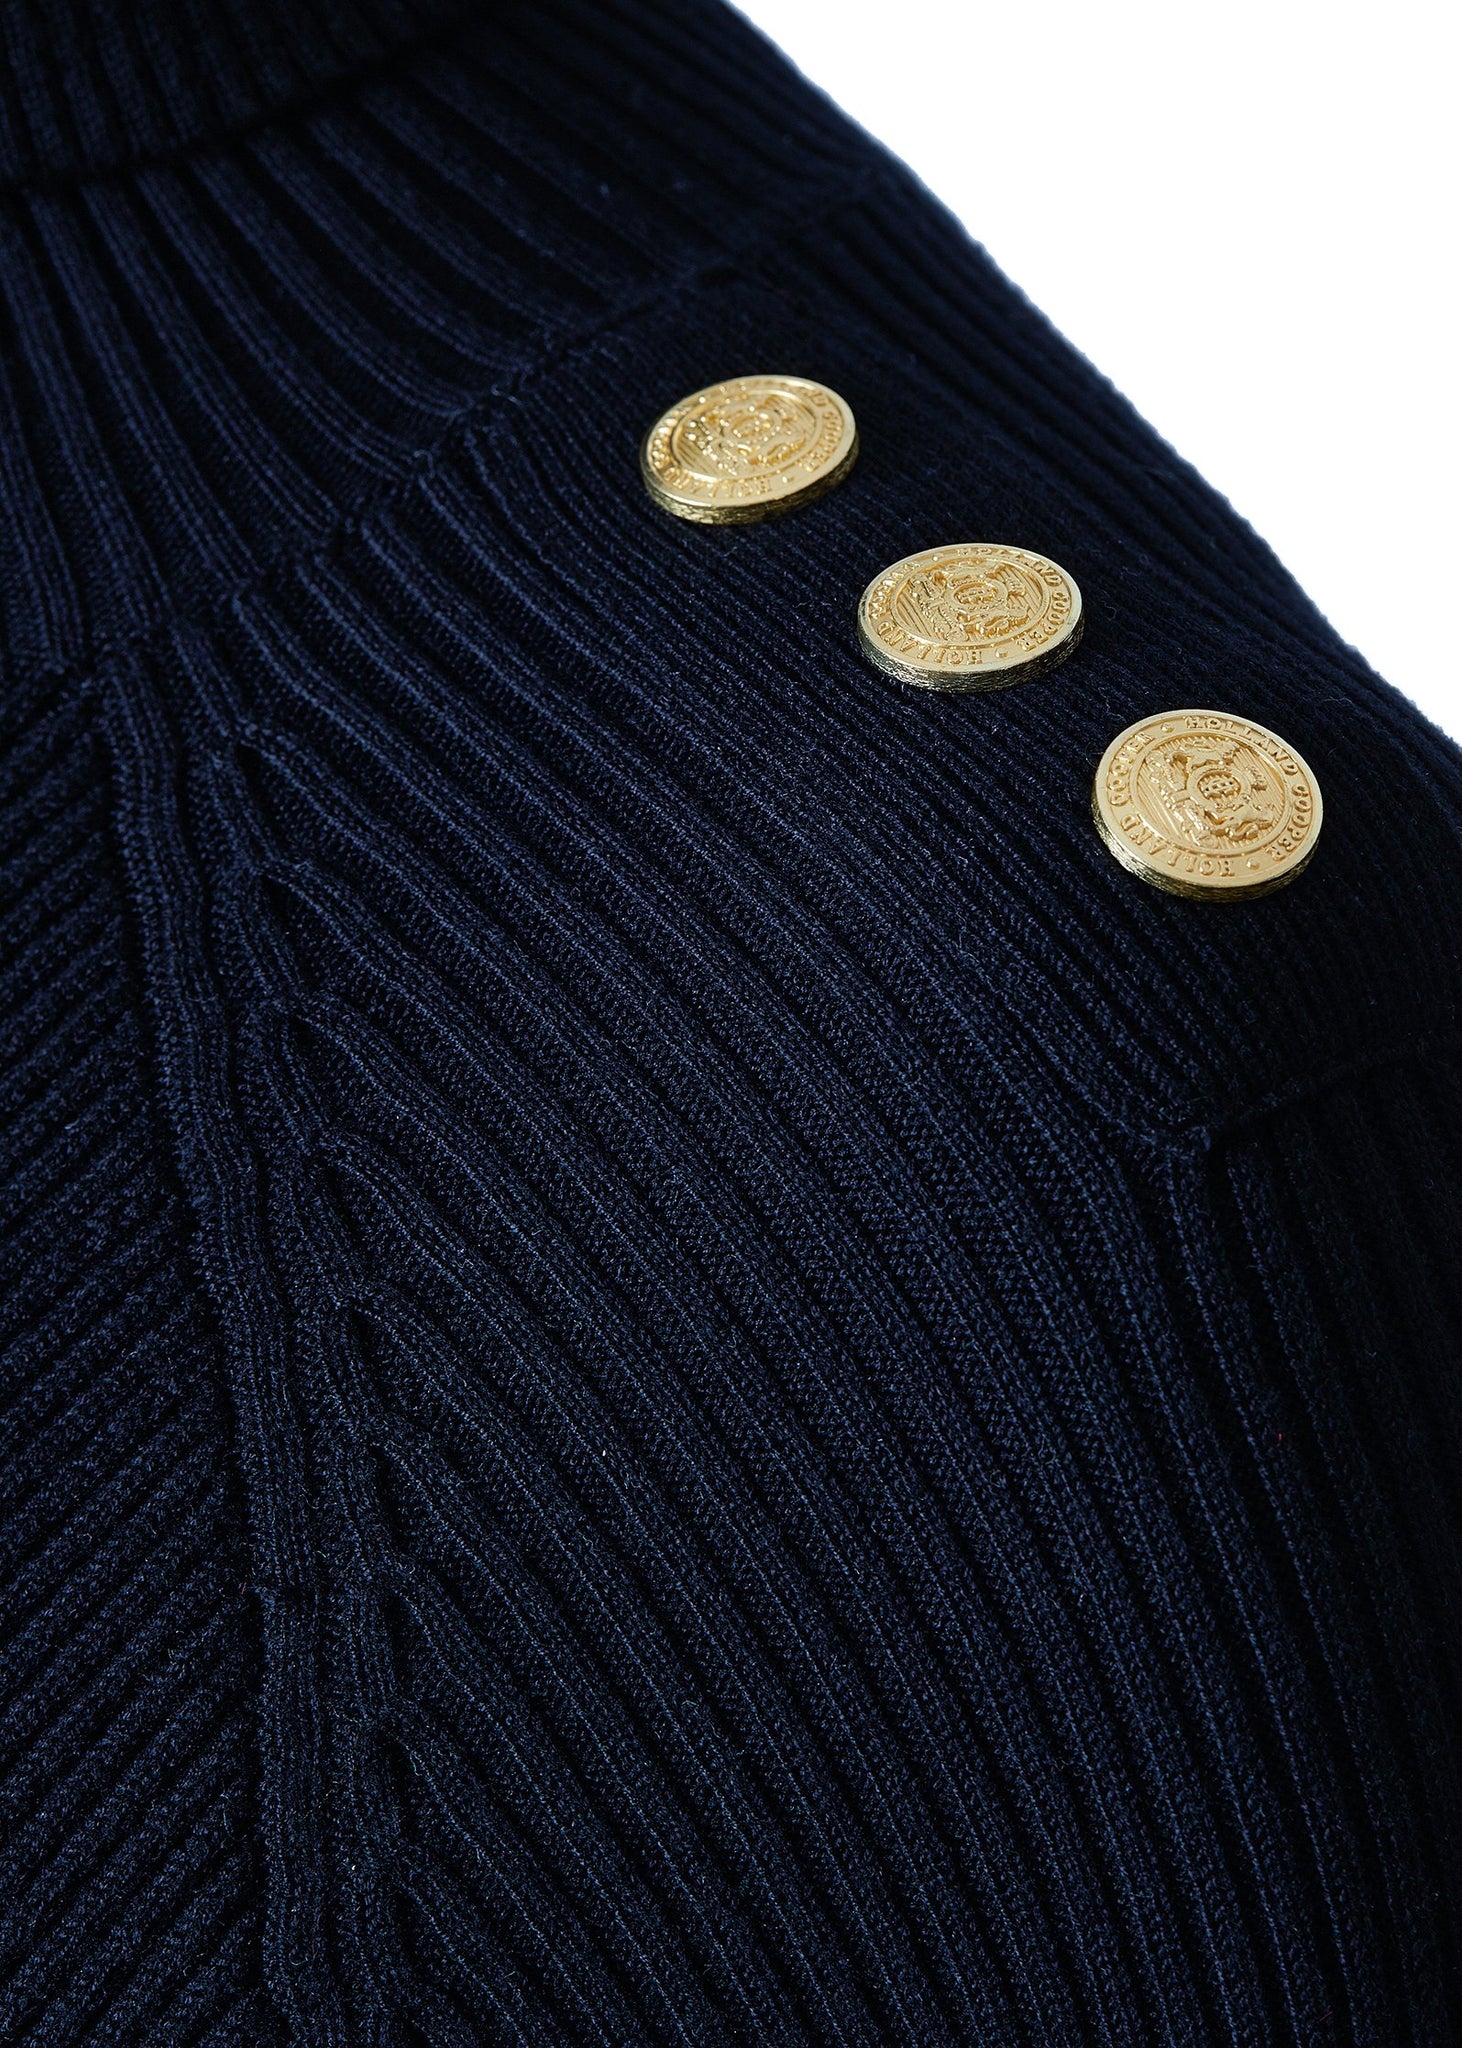 gold button detail on shoulder on womens navy knitted roll neck midi dress 